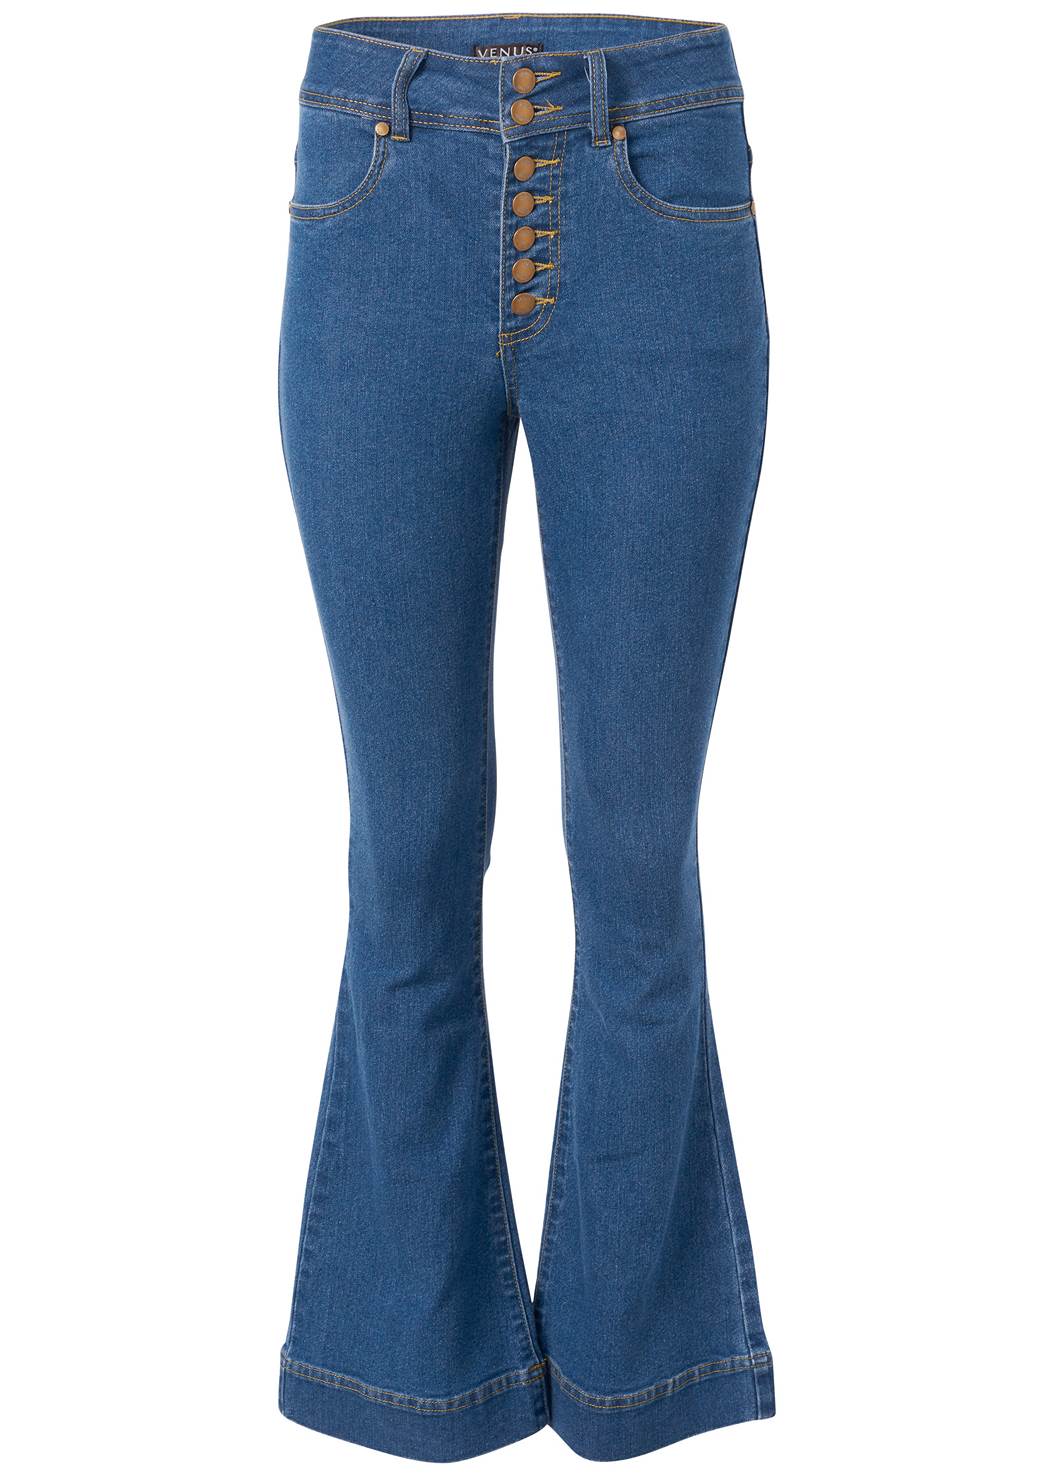 Plus Size High Waisted Flare Jeans in Medium Wash | VENUS